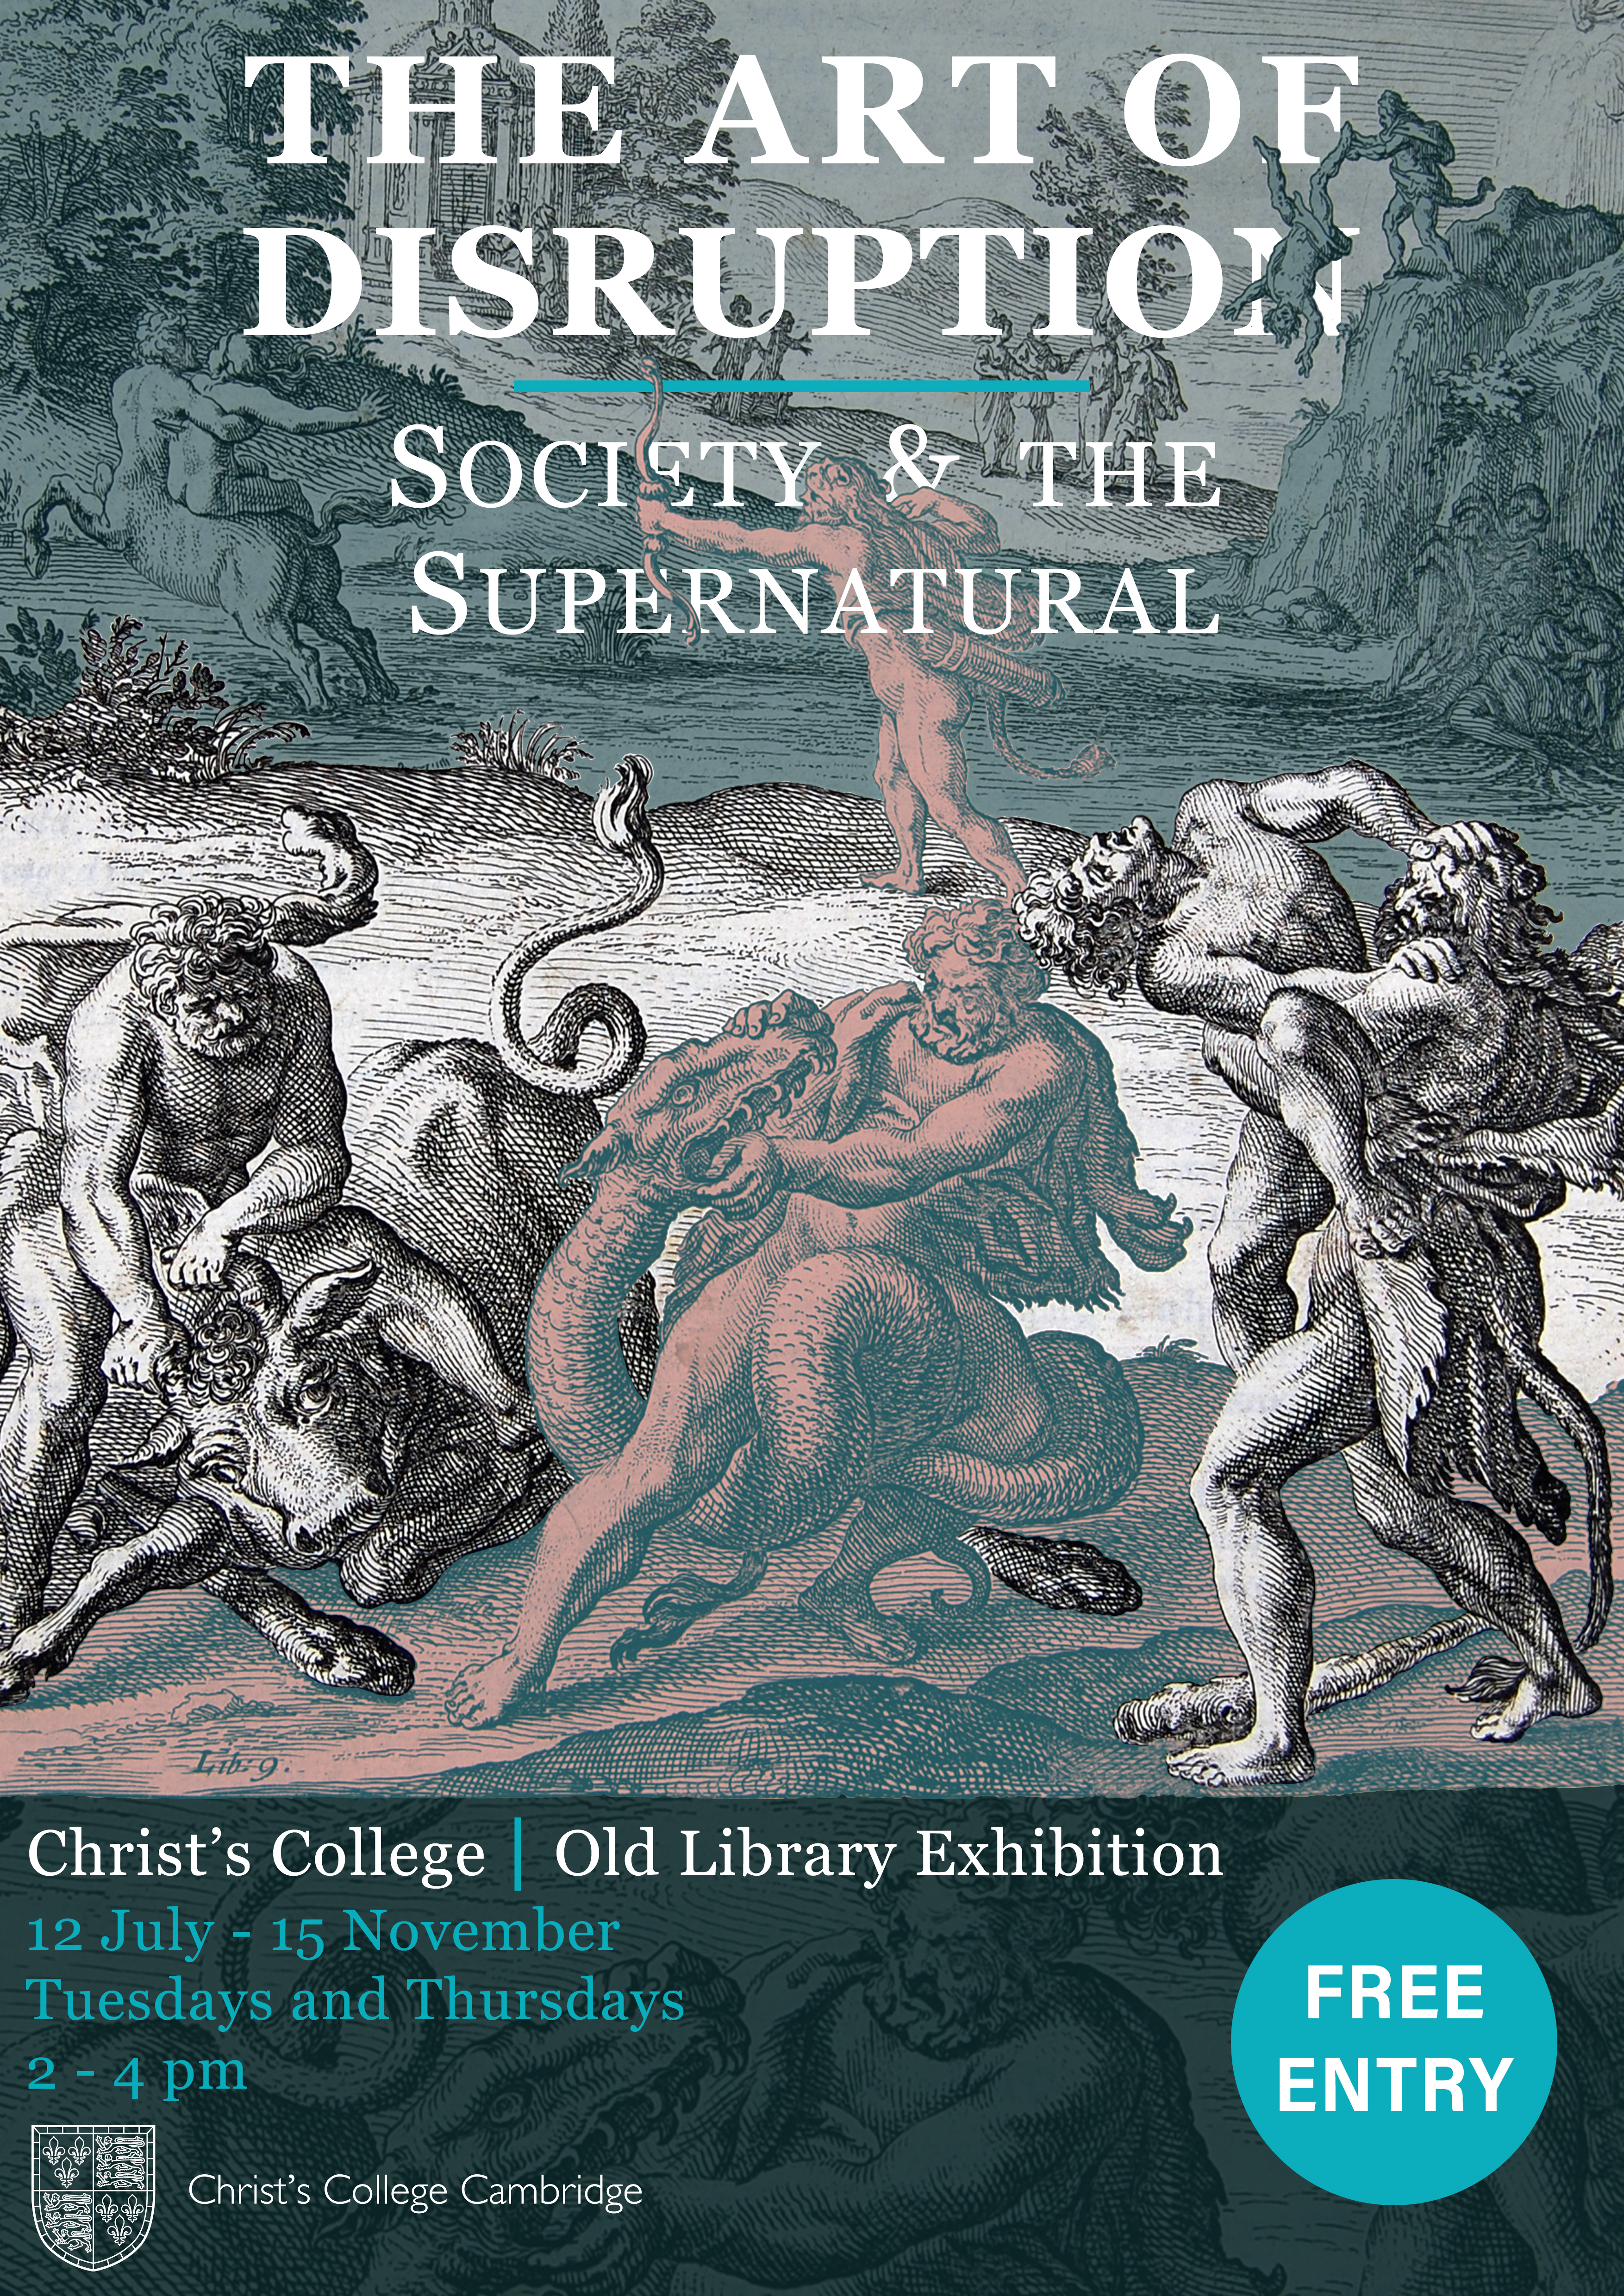 Post for The Art of Disruption: Society & the Supernatural